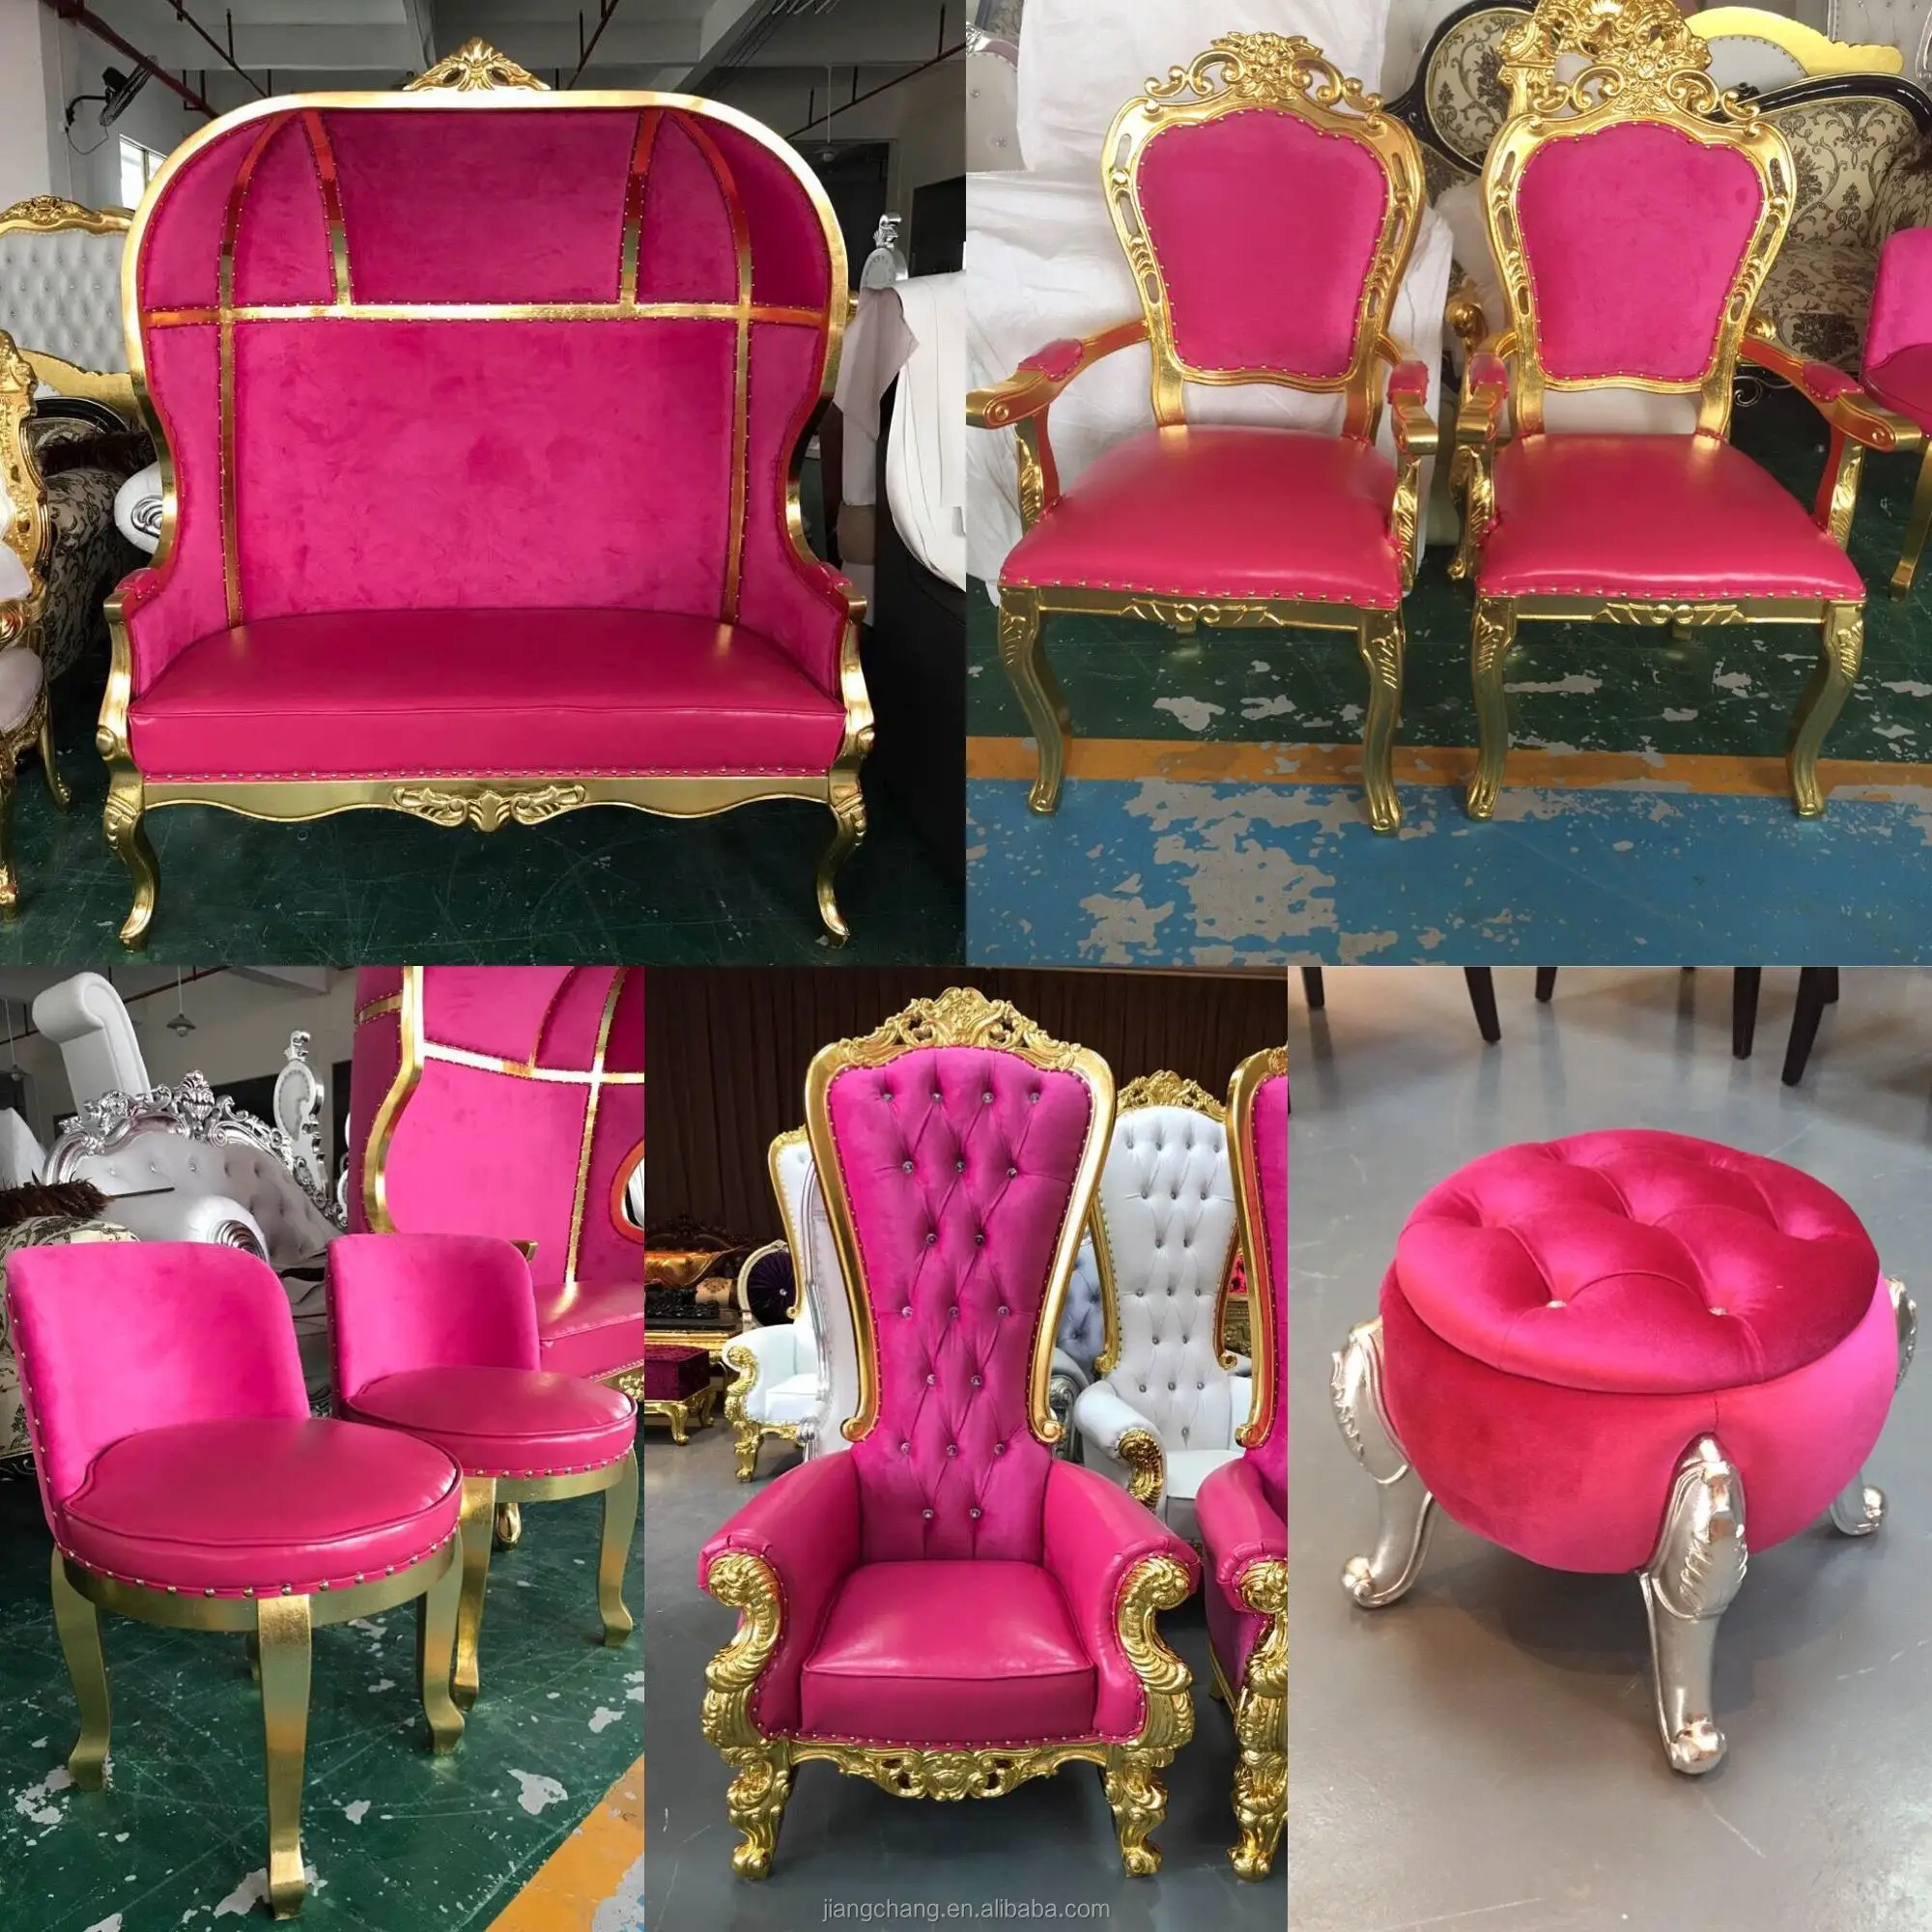 Used Hot Pink Salon Chairs Beauty For Nail Salon Jc-j01 - Buy Hot Pink